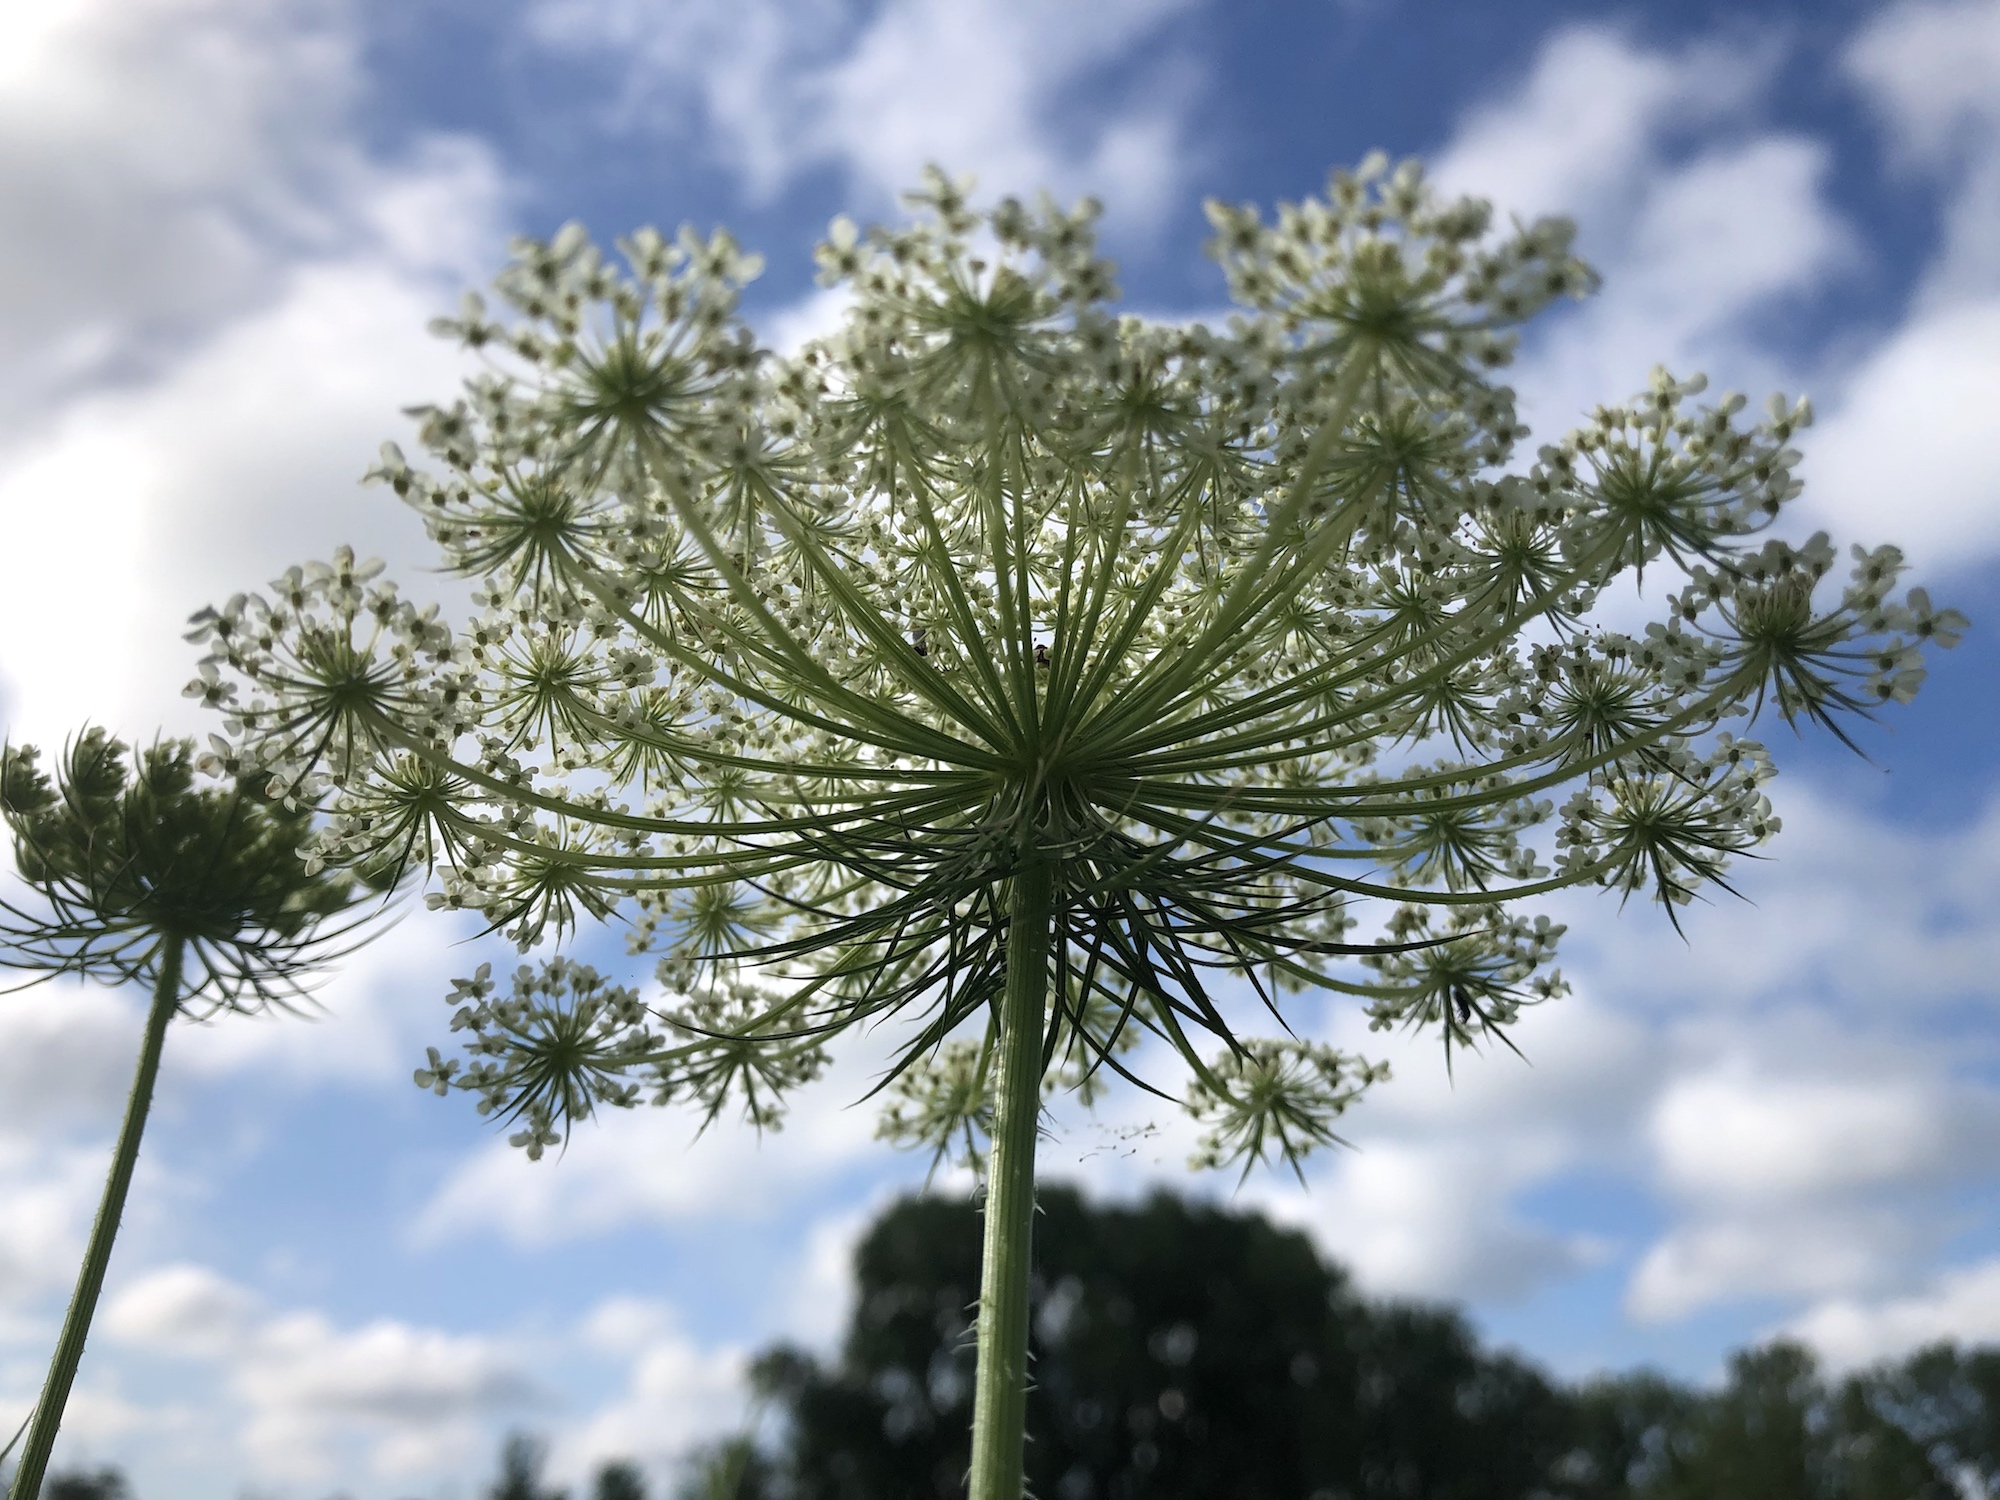 Queen Anne's Lace on bank of retaining pond on the corner of Nakoma Road and Manitou Way in Madison, WI on July 11, 2019.